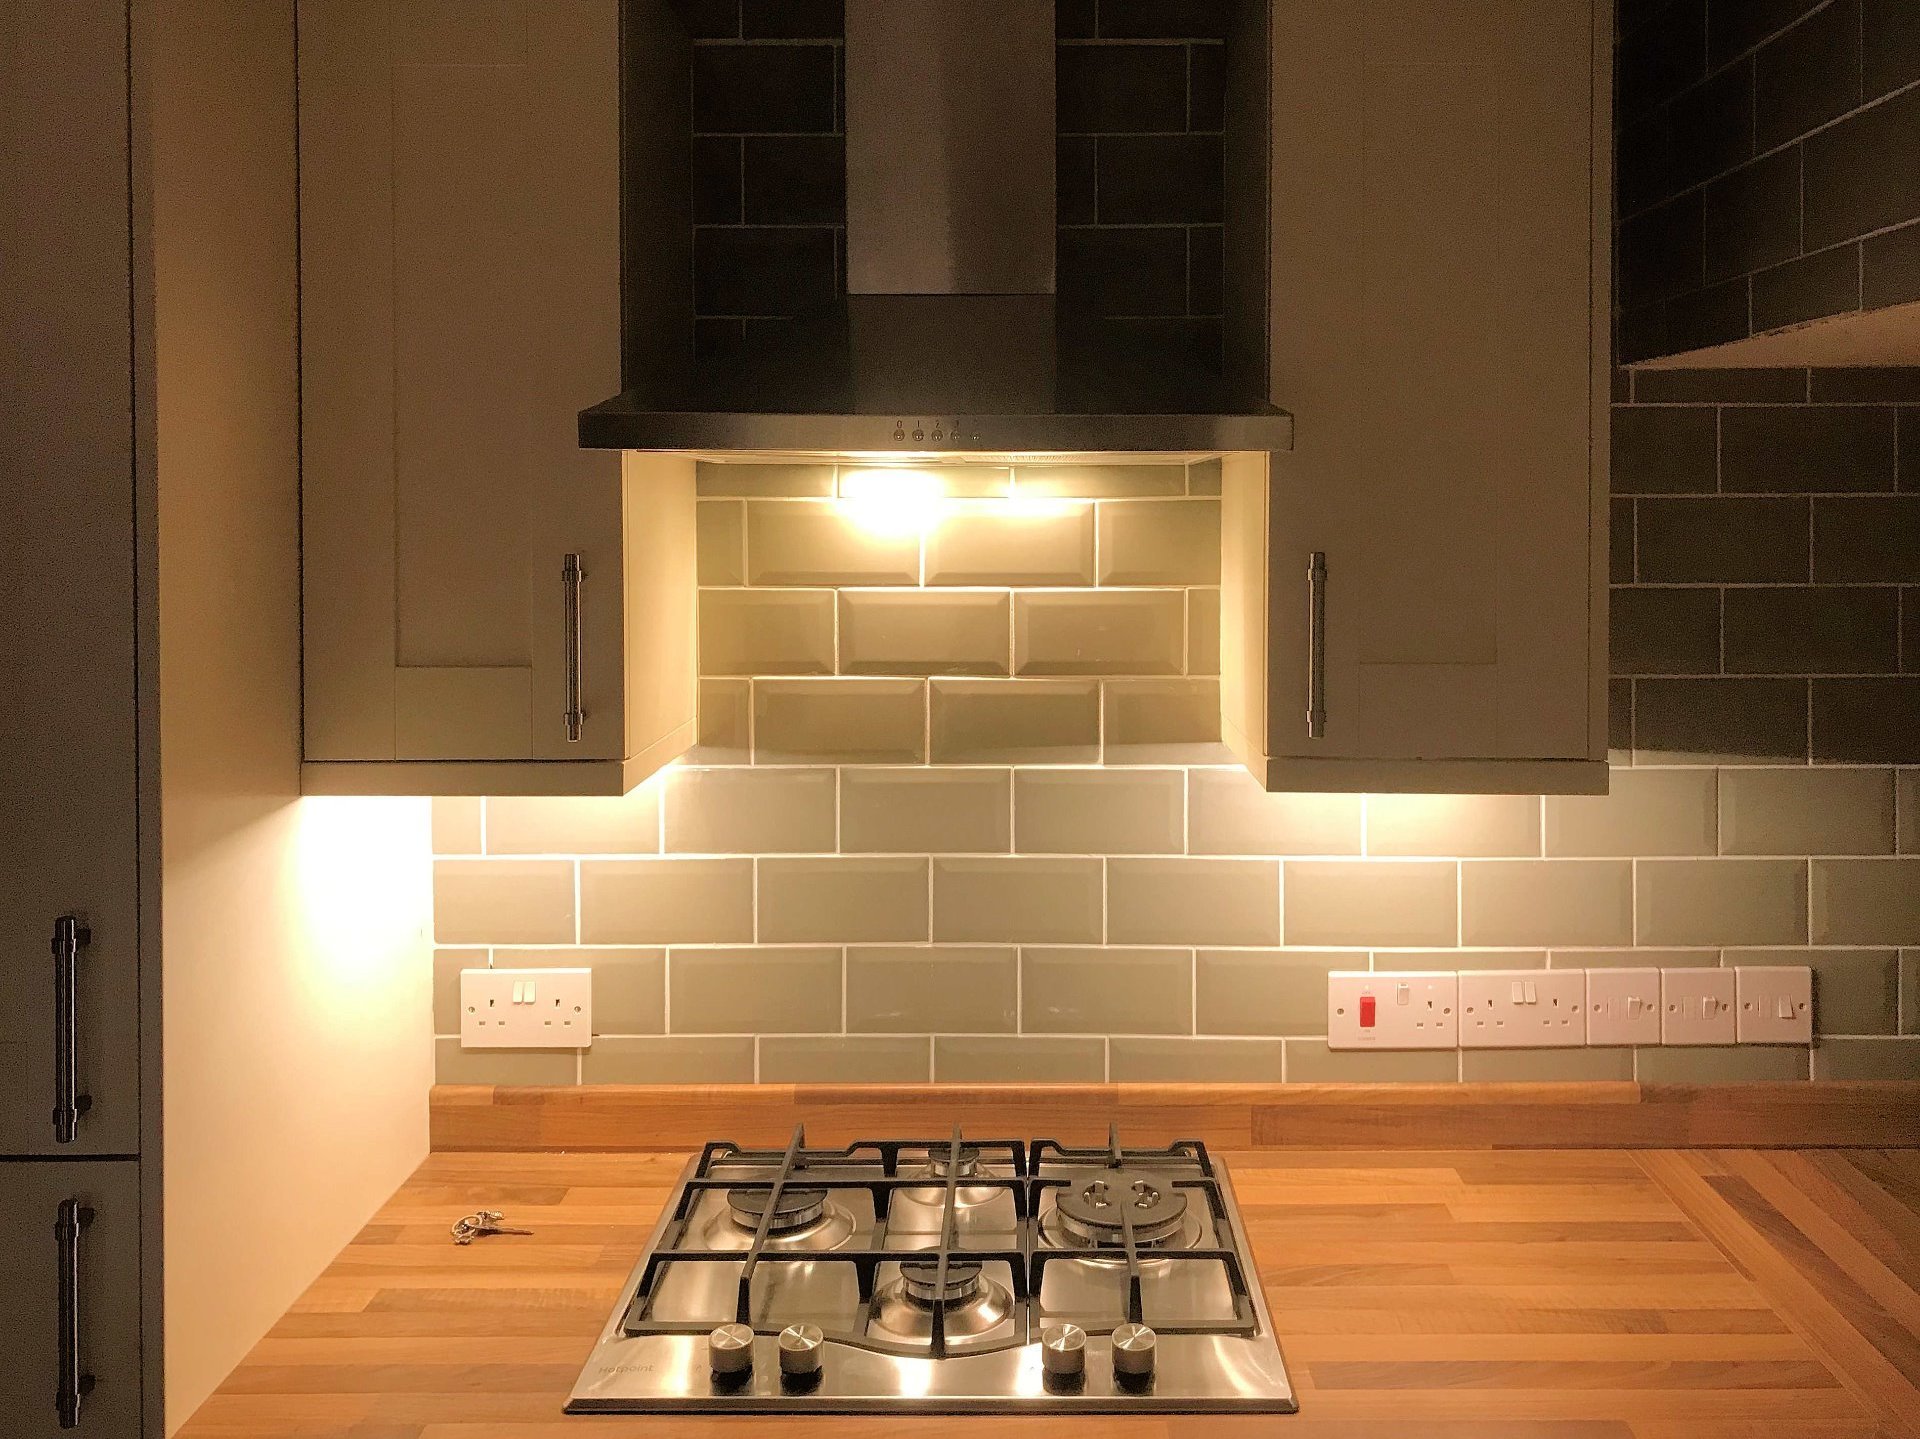 Kitchen Units Fitted with Led lighting. Barnstaple North Devon